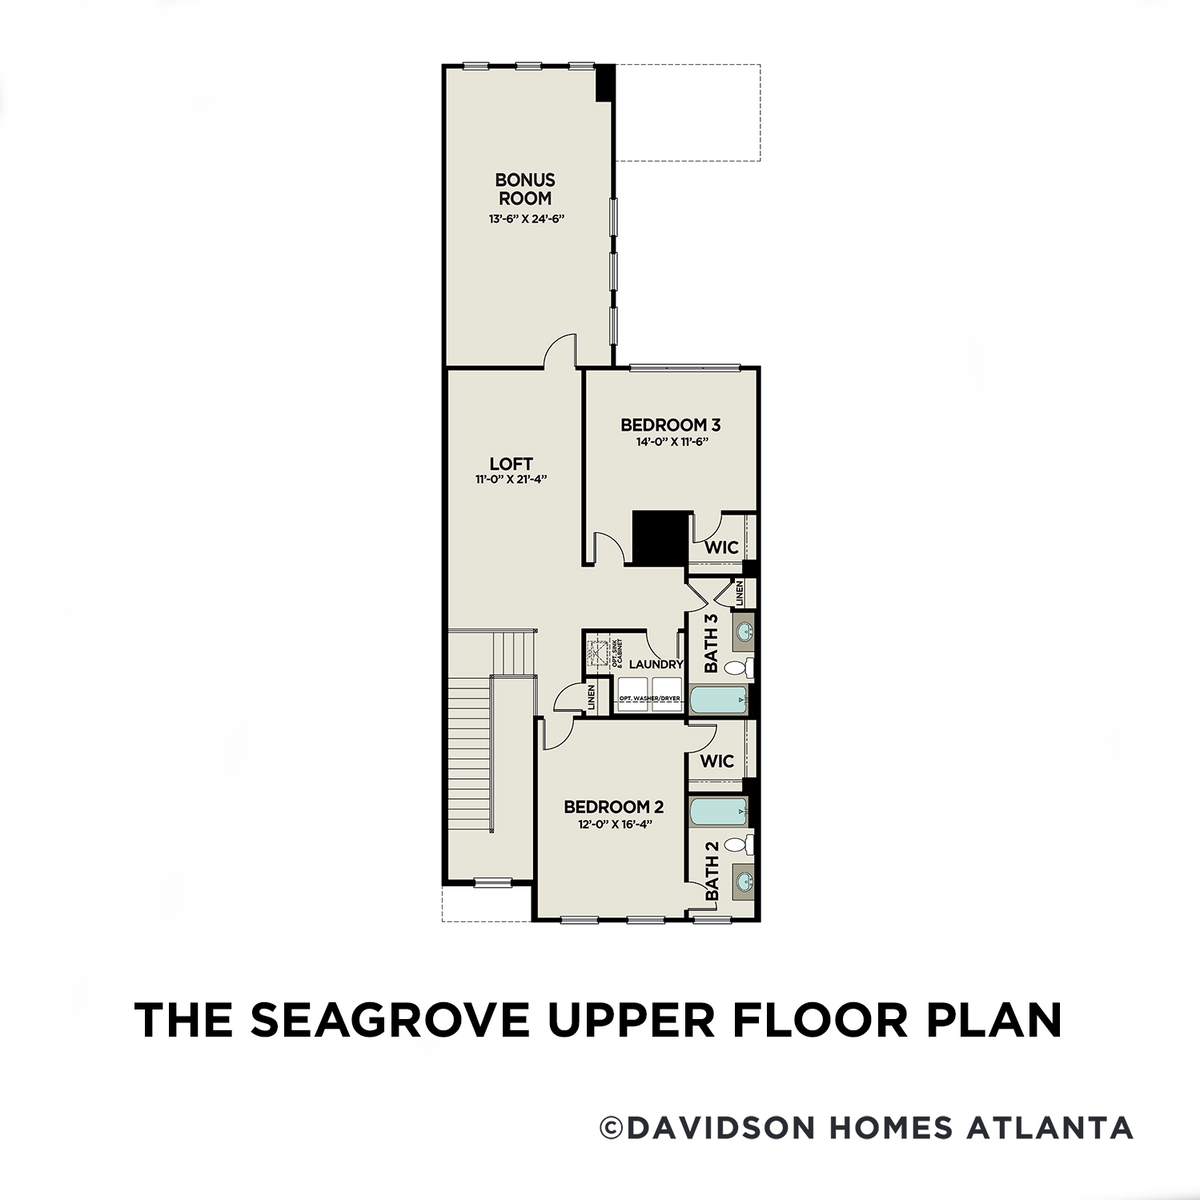 2 - The Seagrove B floor plan layout for 760 Stickley Oak Way in Davidson Homes' The Village at Towne Lake community.